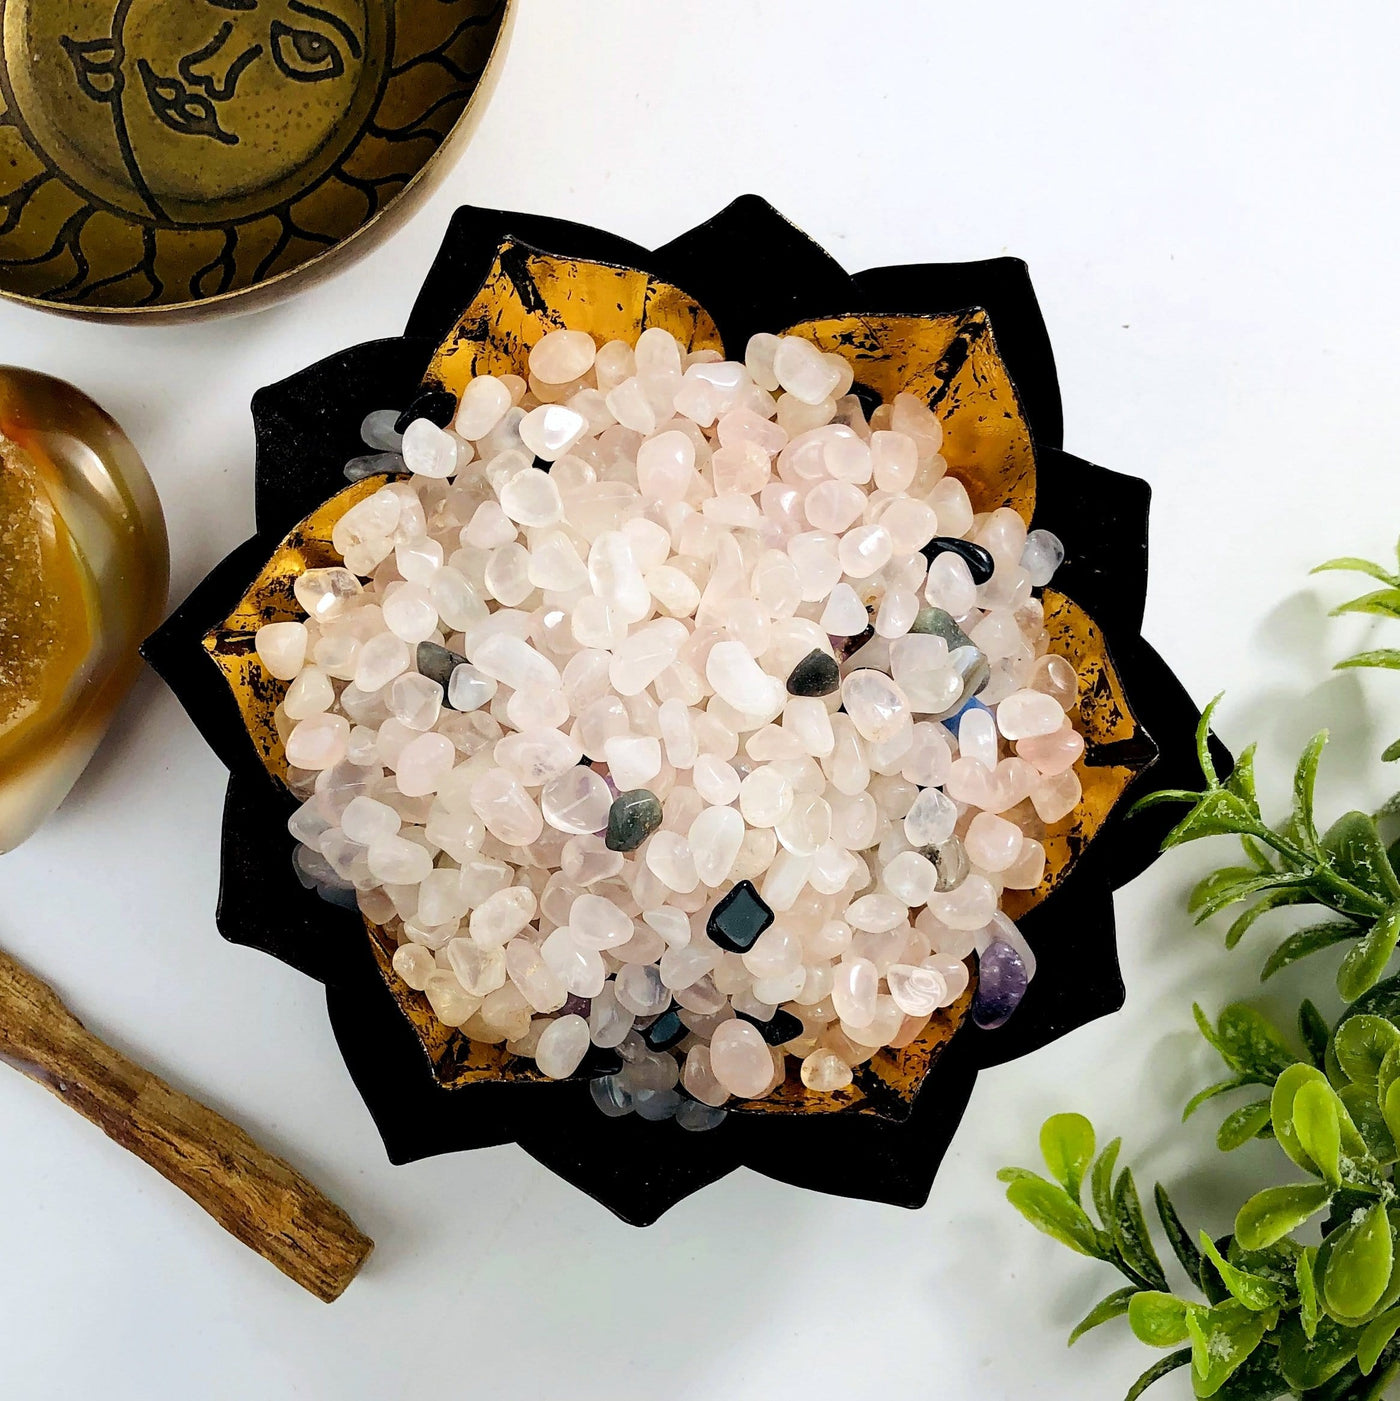 Rose quartz chips in a lotus bowl, a few other stones are in the mix.